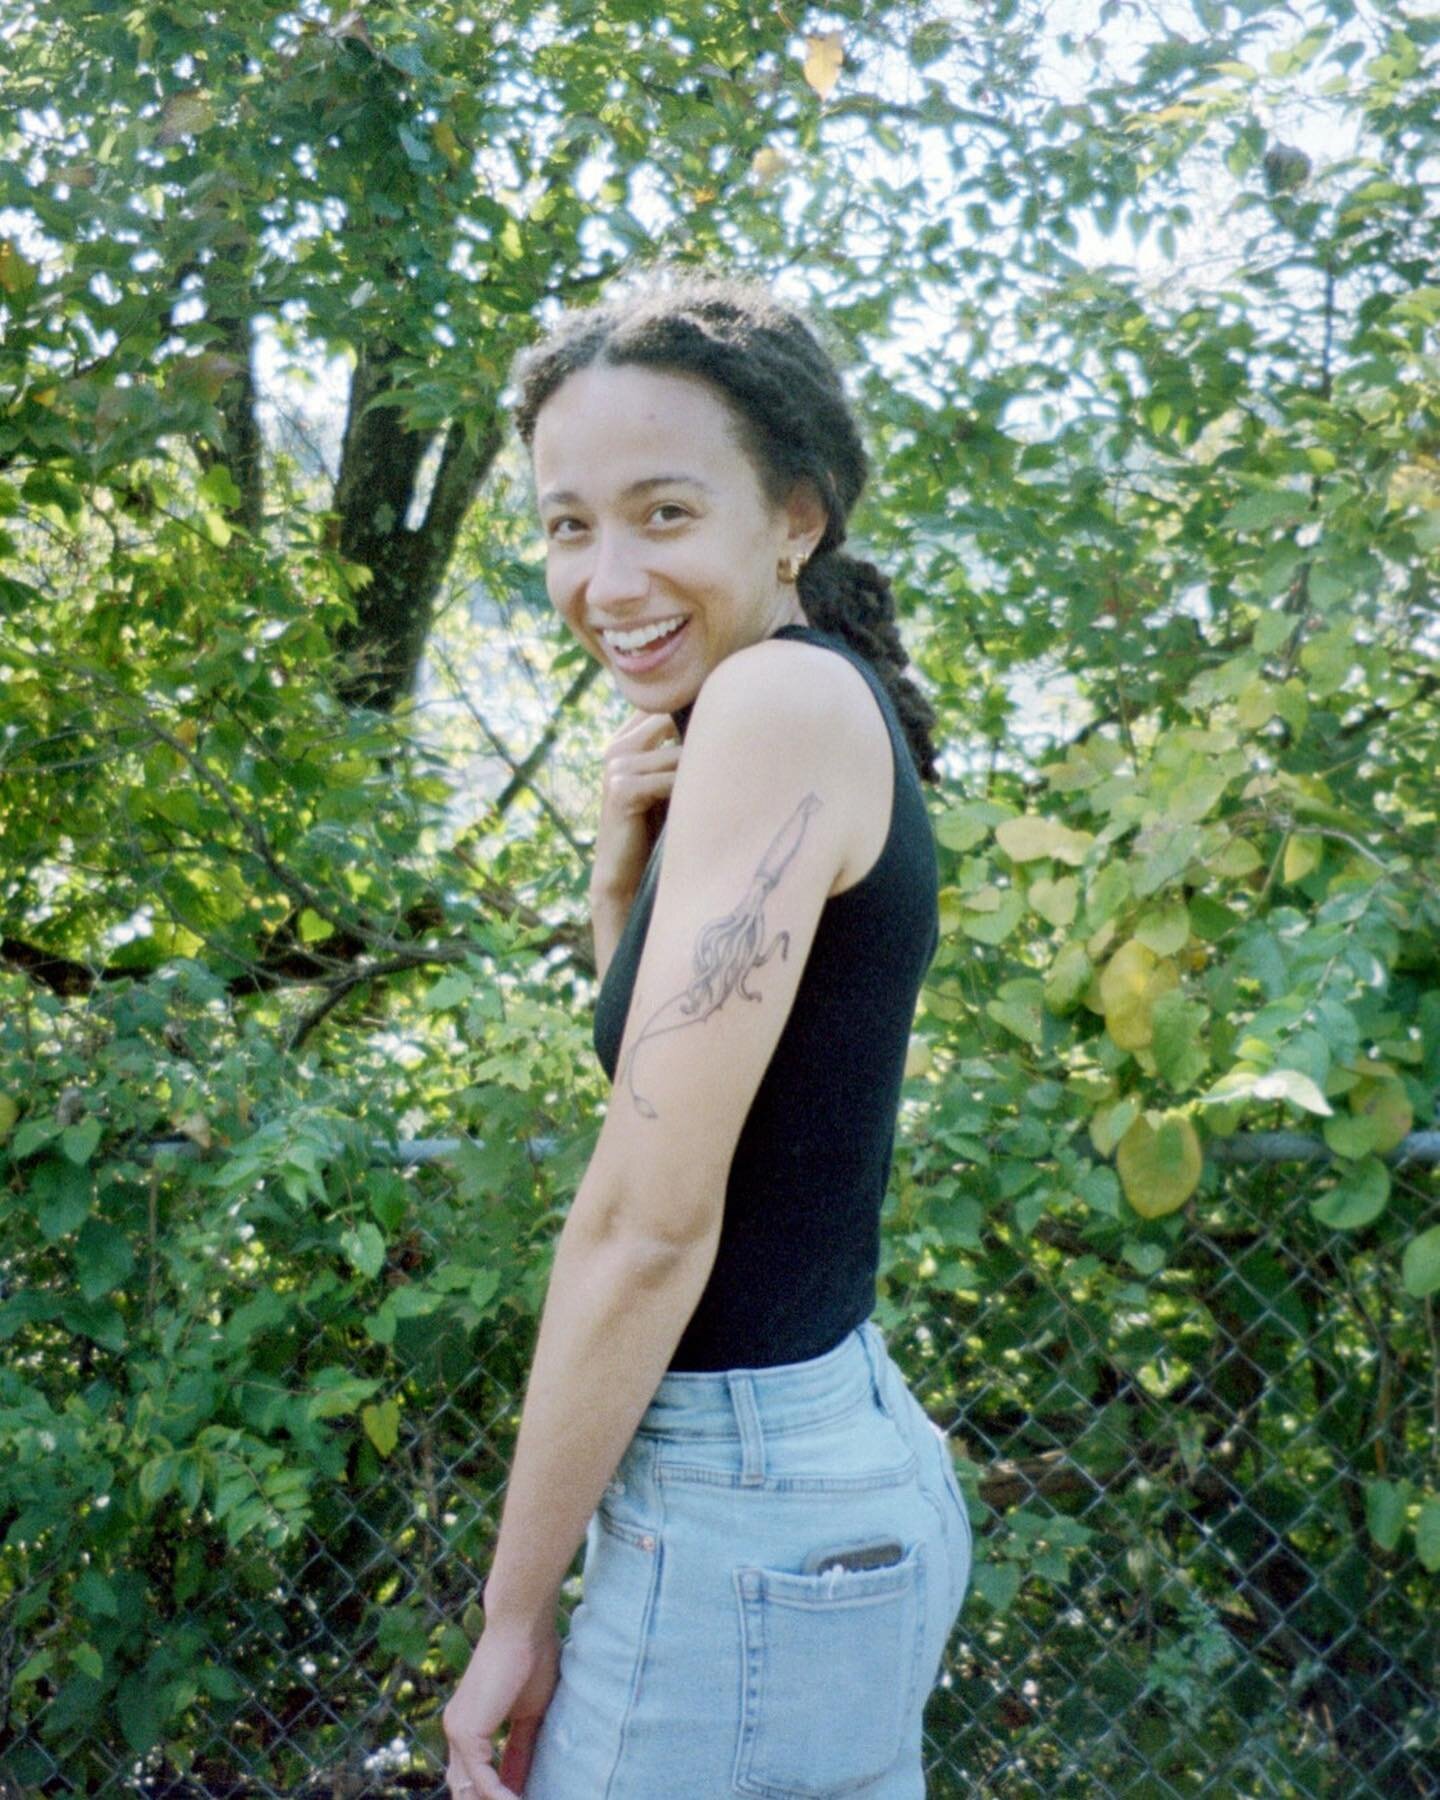 A few moments on film 🎞✨
⠀⠀⠀⠀⠀⠀⠀⠀⠀
1. The day I got my tattoo! It's healing up so beautifully, and I'm still just as obsessed with it as I was on day one. @serahsubmarine 
⠀⠀⠀⠀⠀⠀⠀⠀⠀
2. The day my dad and little brother drove down to deliver my preci